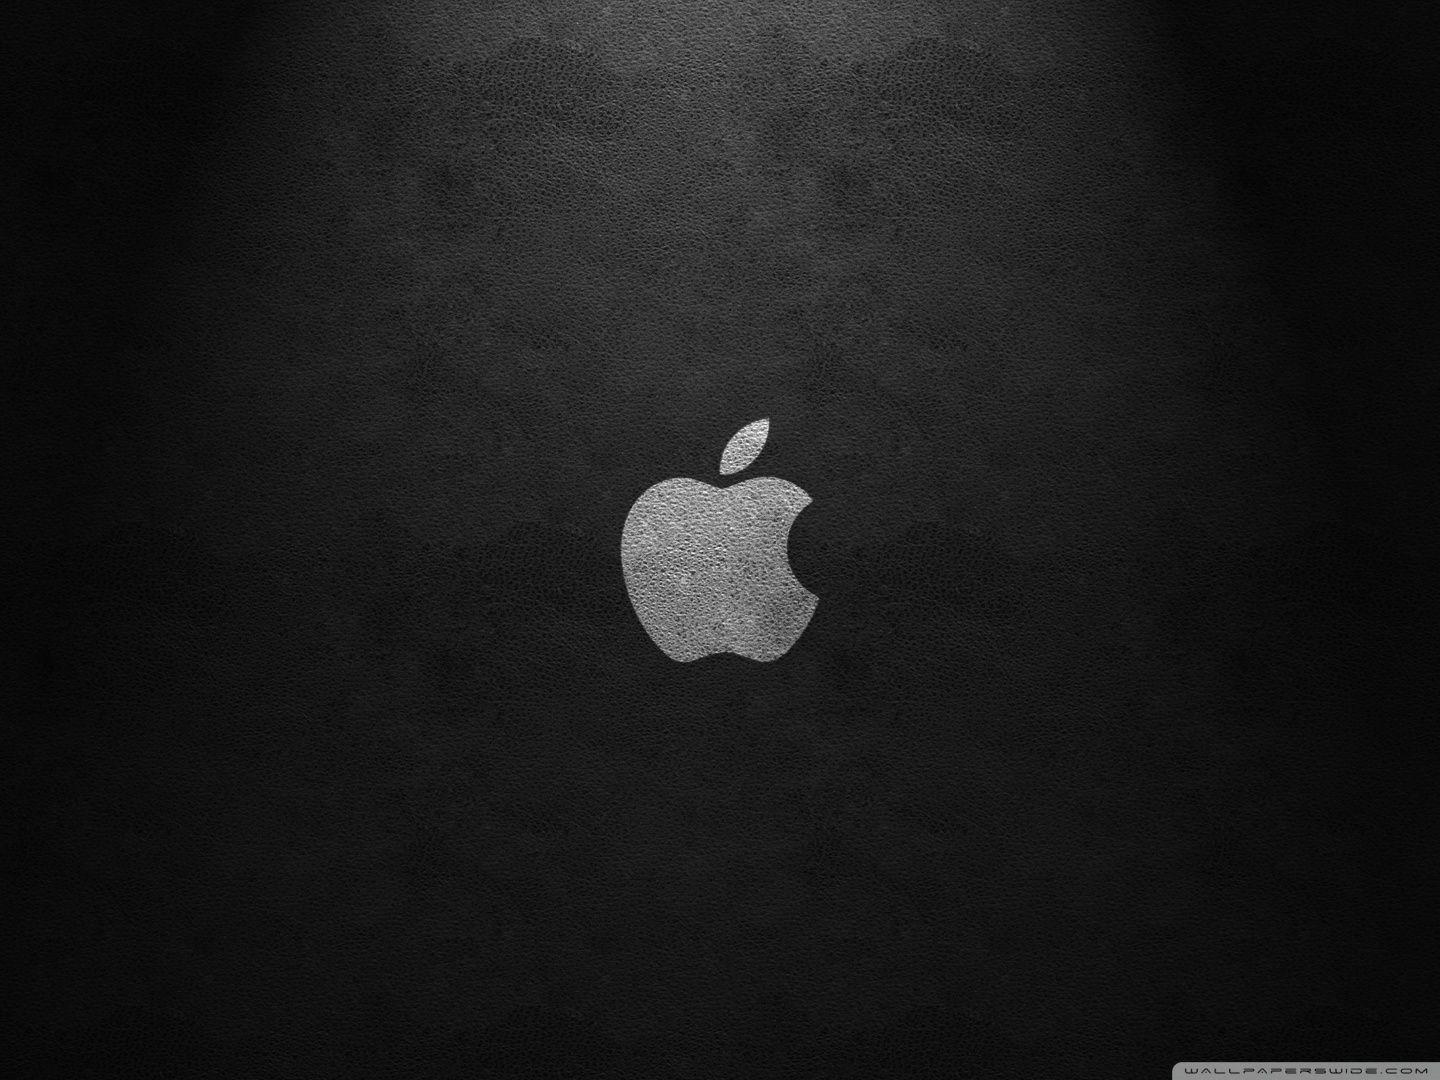 Leather Apple Wallpapers - Top Free Leather Apple Backgrounds ...